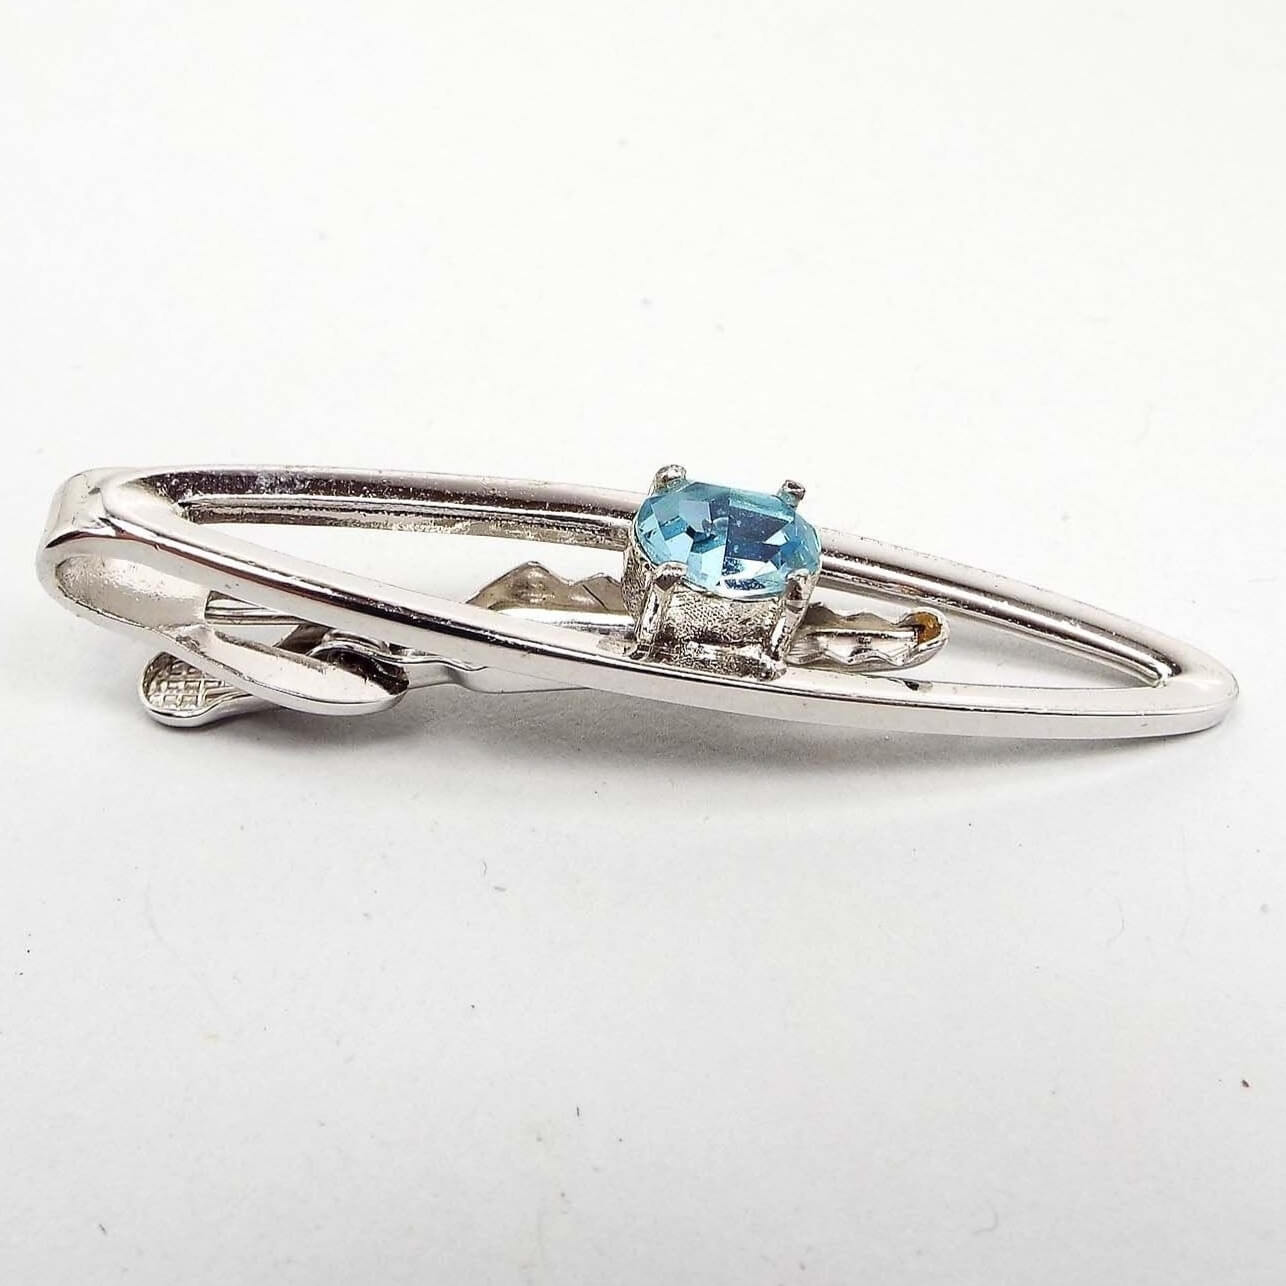 Angled front view of the Mid Century vintage Dante rhinestone tie clip. The metal is silver tone in color. It has an open long oval design with a light blue oval rhinestone in the middle. The rhinestone is prong set. 